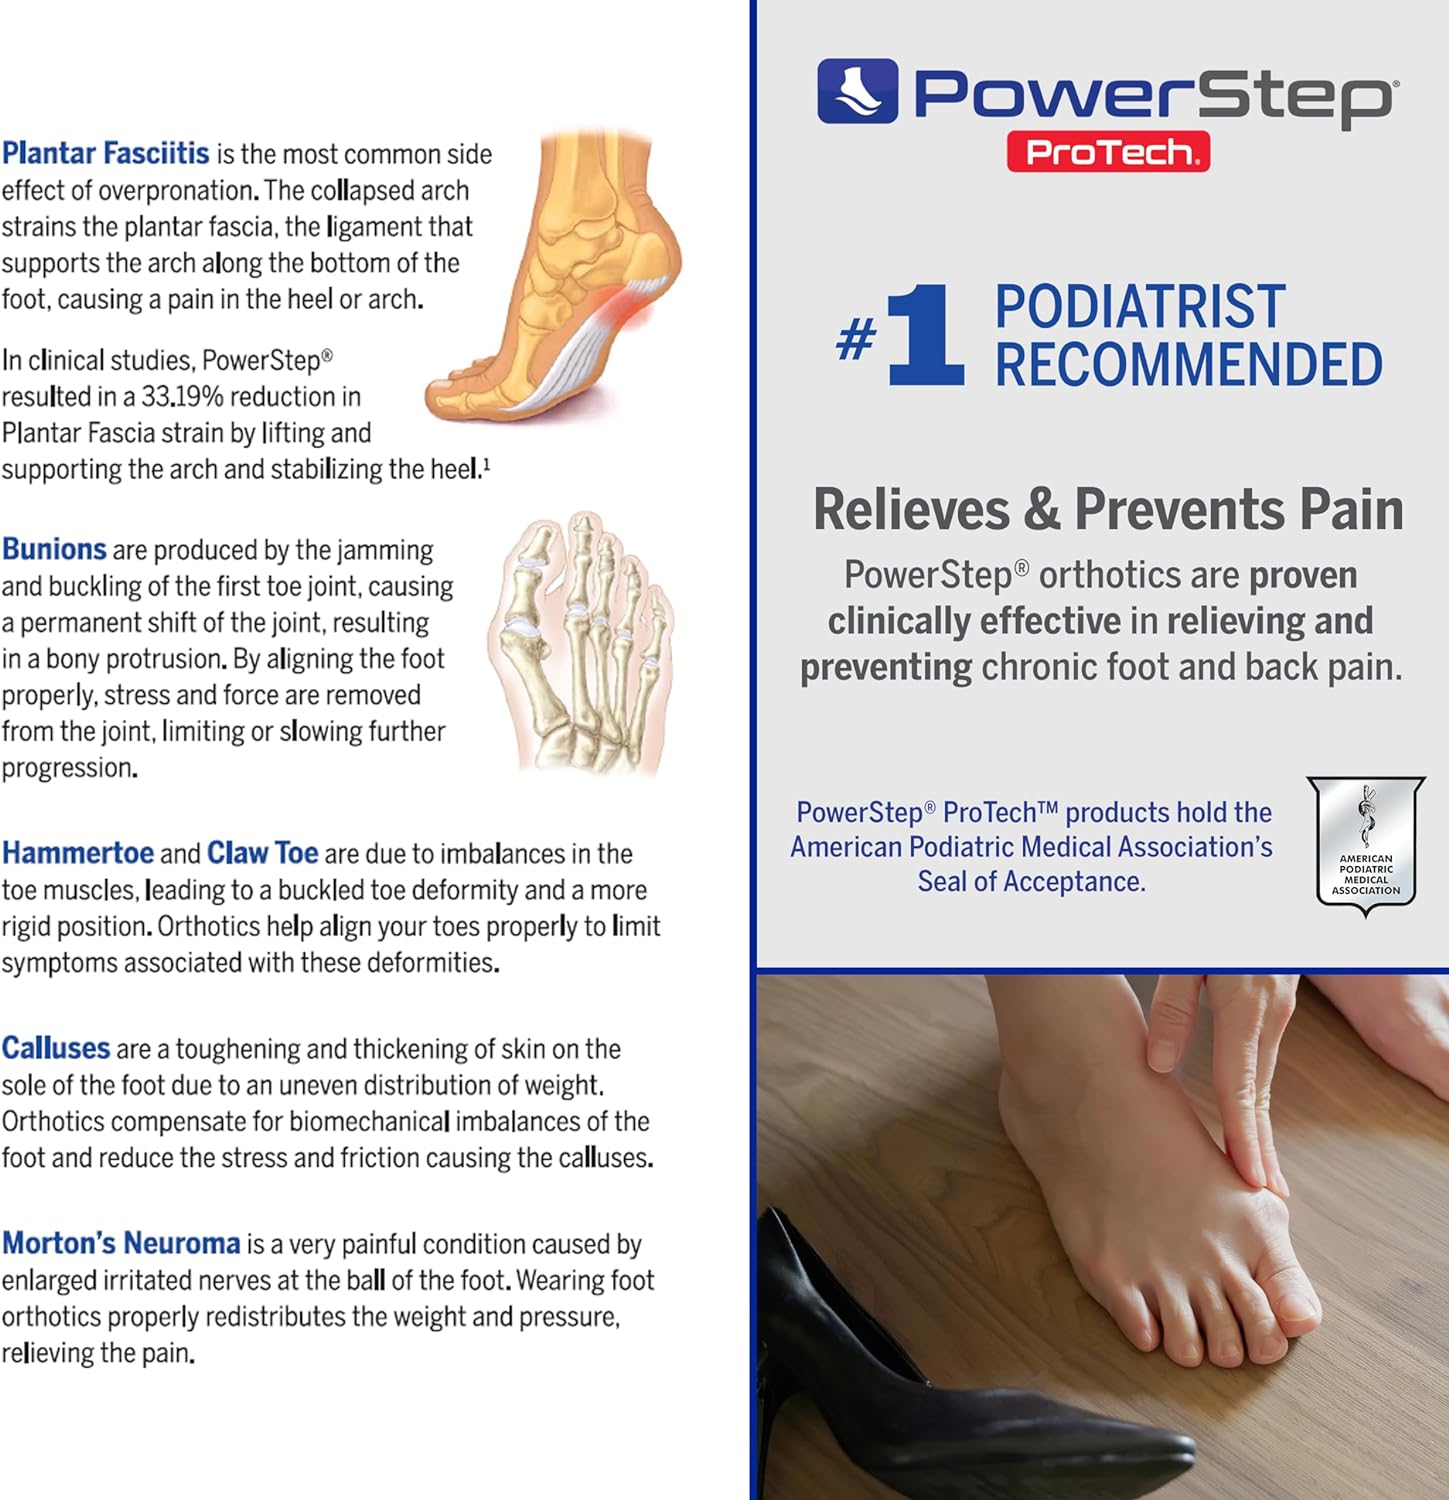 Powerstep ProTech Full Length High Orthotic Insoles - Medical Grade Pain Relief Orthotic Inserts with High Arch Support - Maximum Cushioning for Supination + Plantar Fasciitis (M 8-8.5 W 10-10.5)